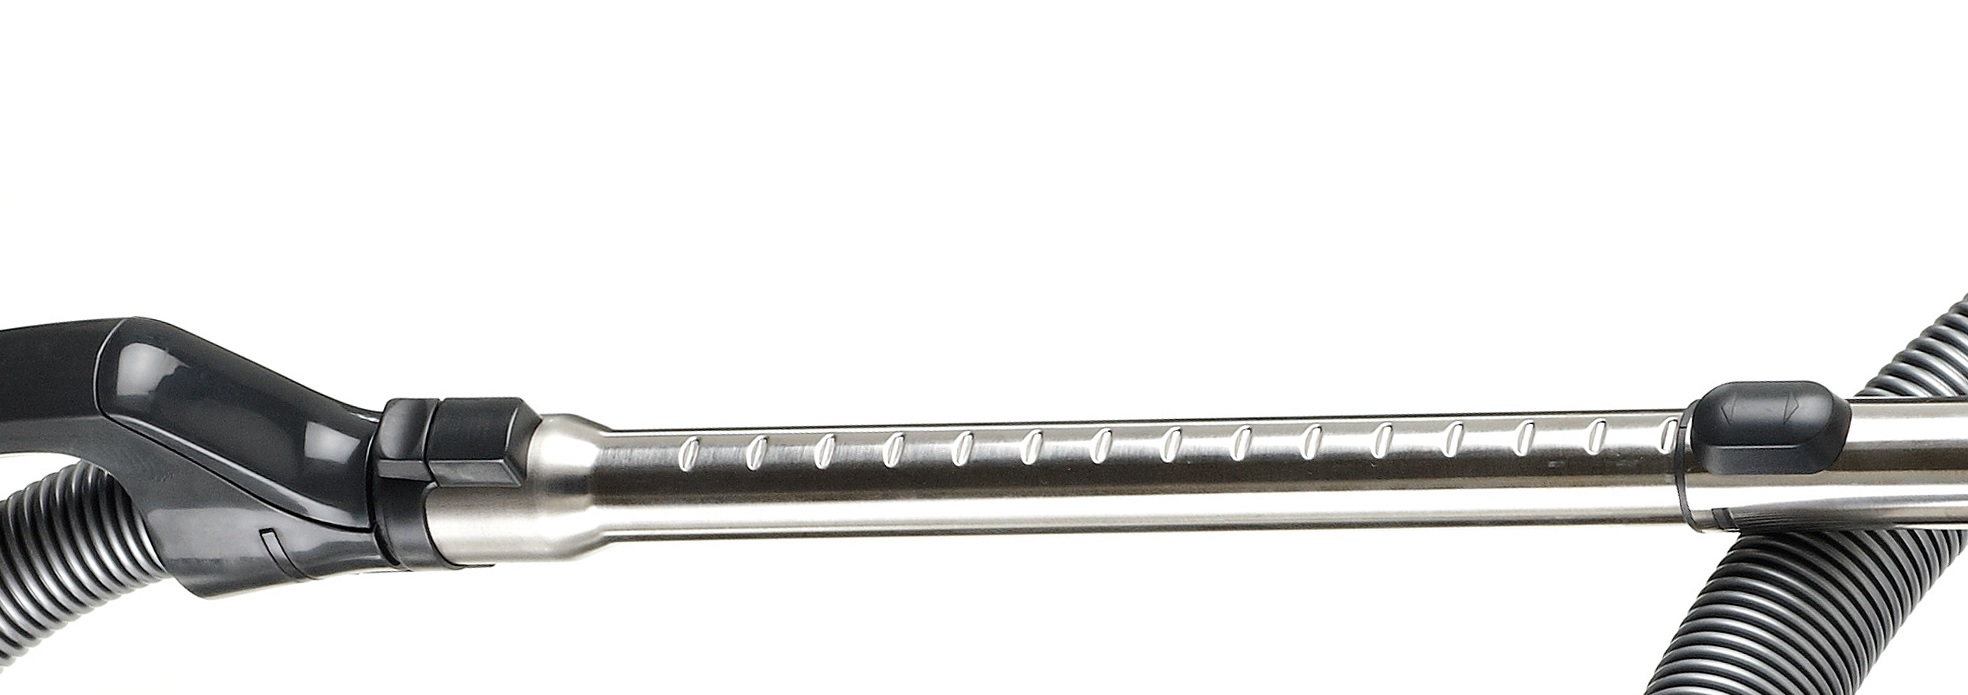 Stainless steel telescopic wand